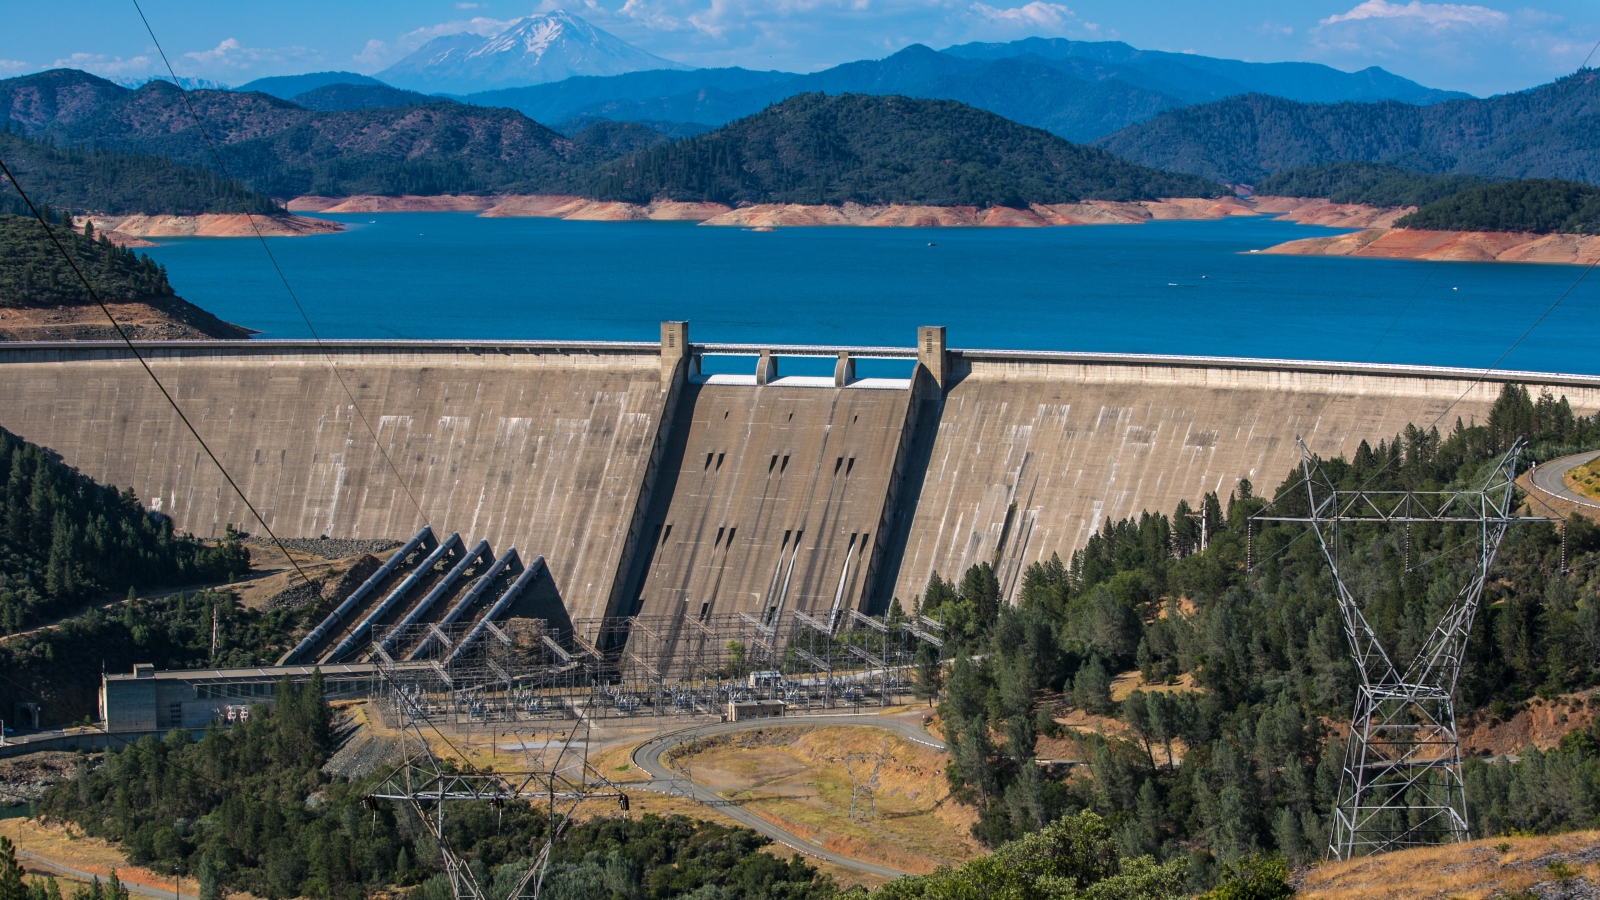 Lake Shasta, California's largest dam and water reservoir feeding the Sacramento River, sits at historically low levels in July 2015.